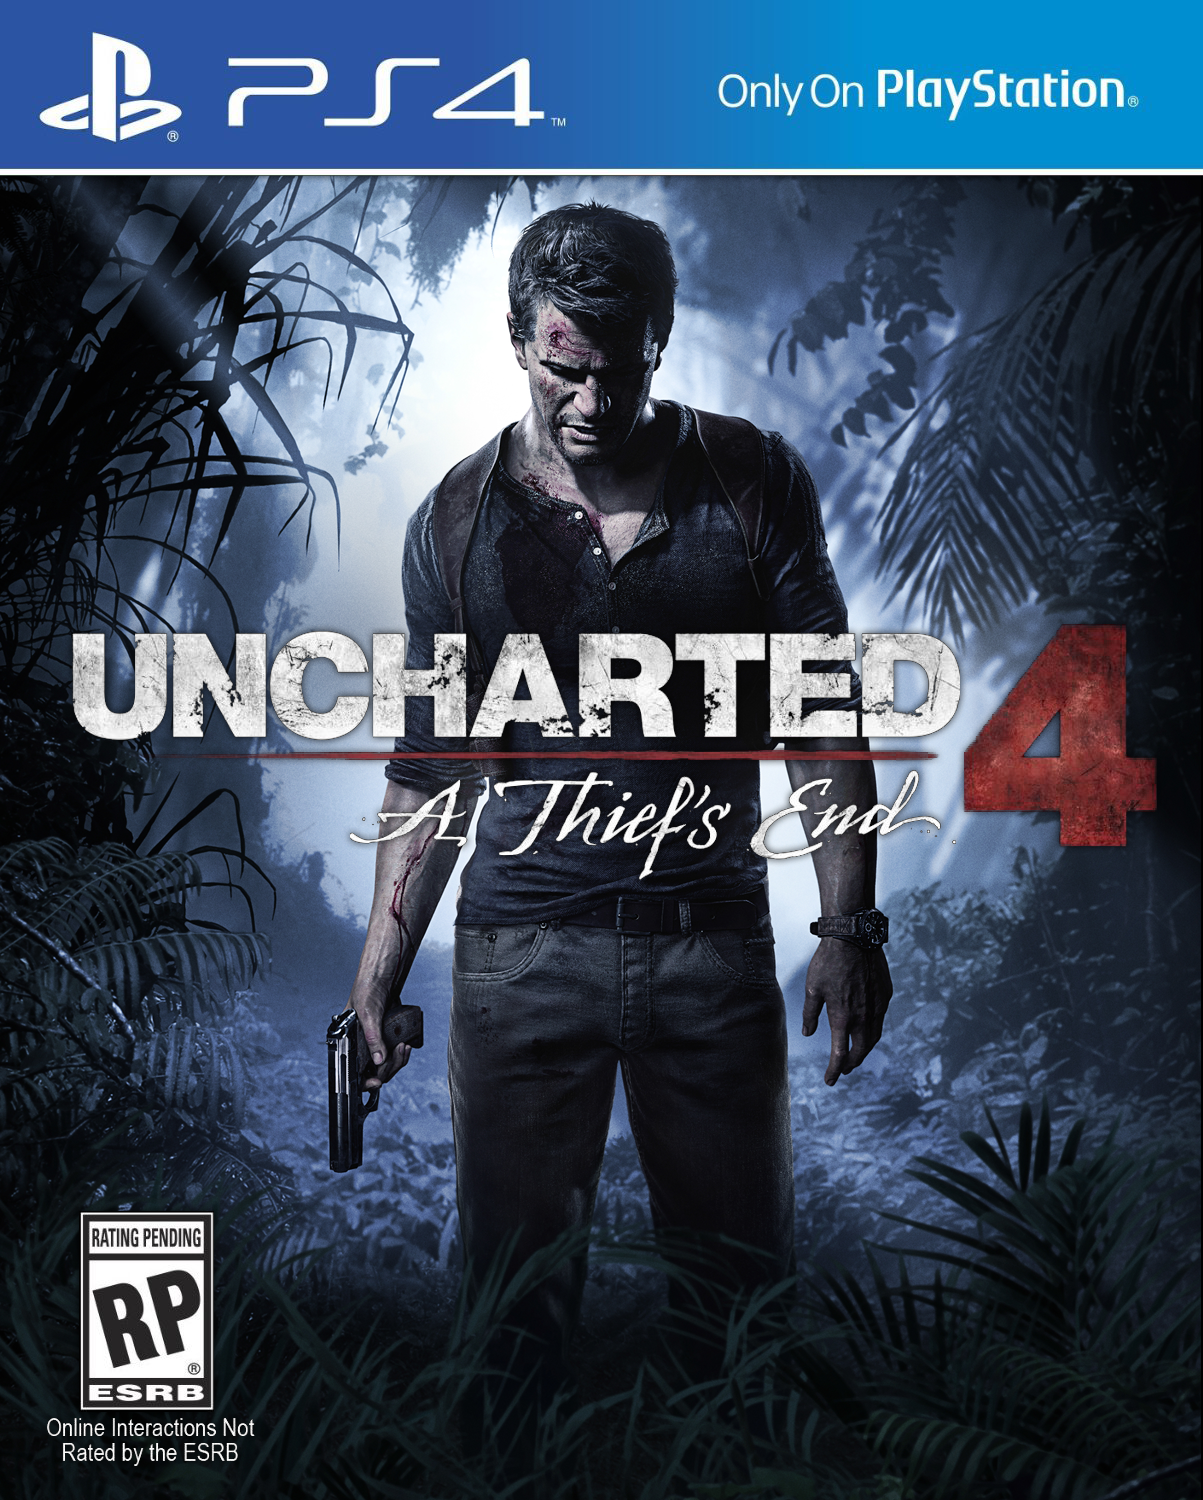 Skynd dig Anvendt bunke Uncharted 4: A Thief's End | PlayStation Wiki | Fandom